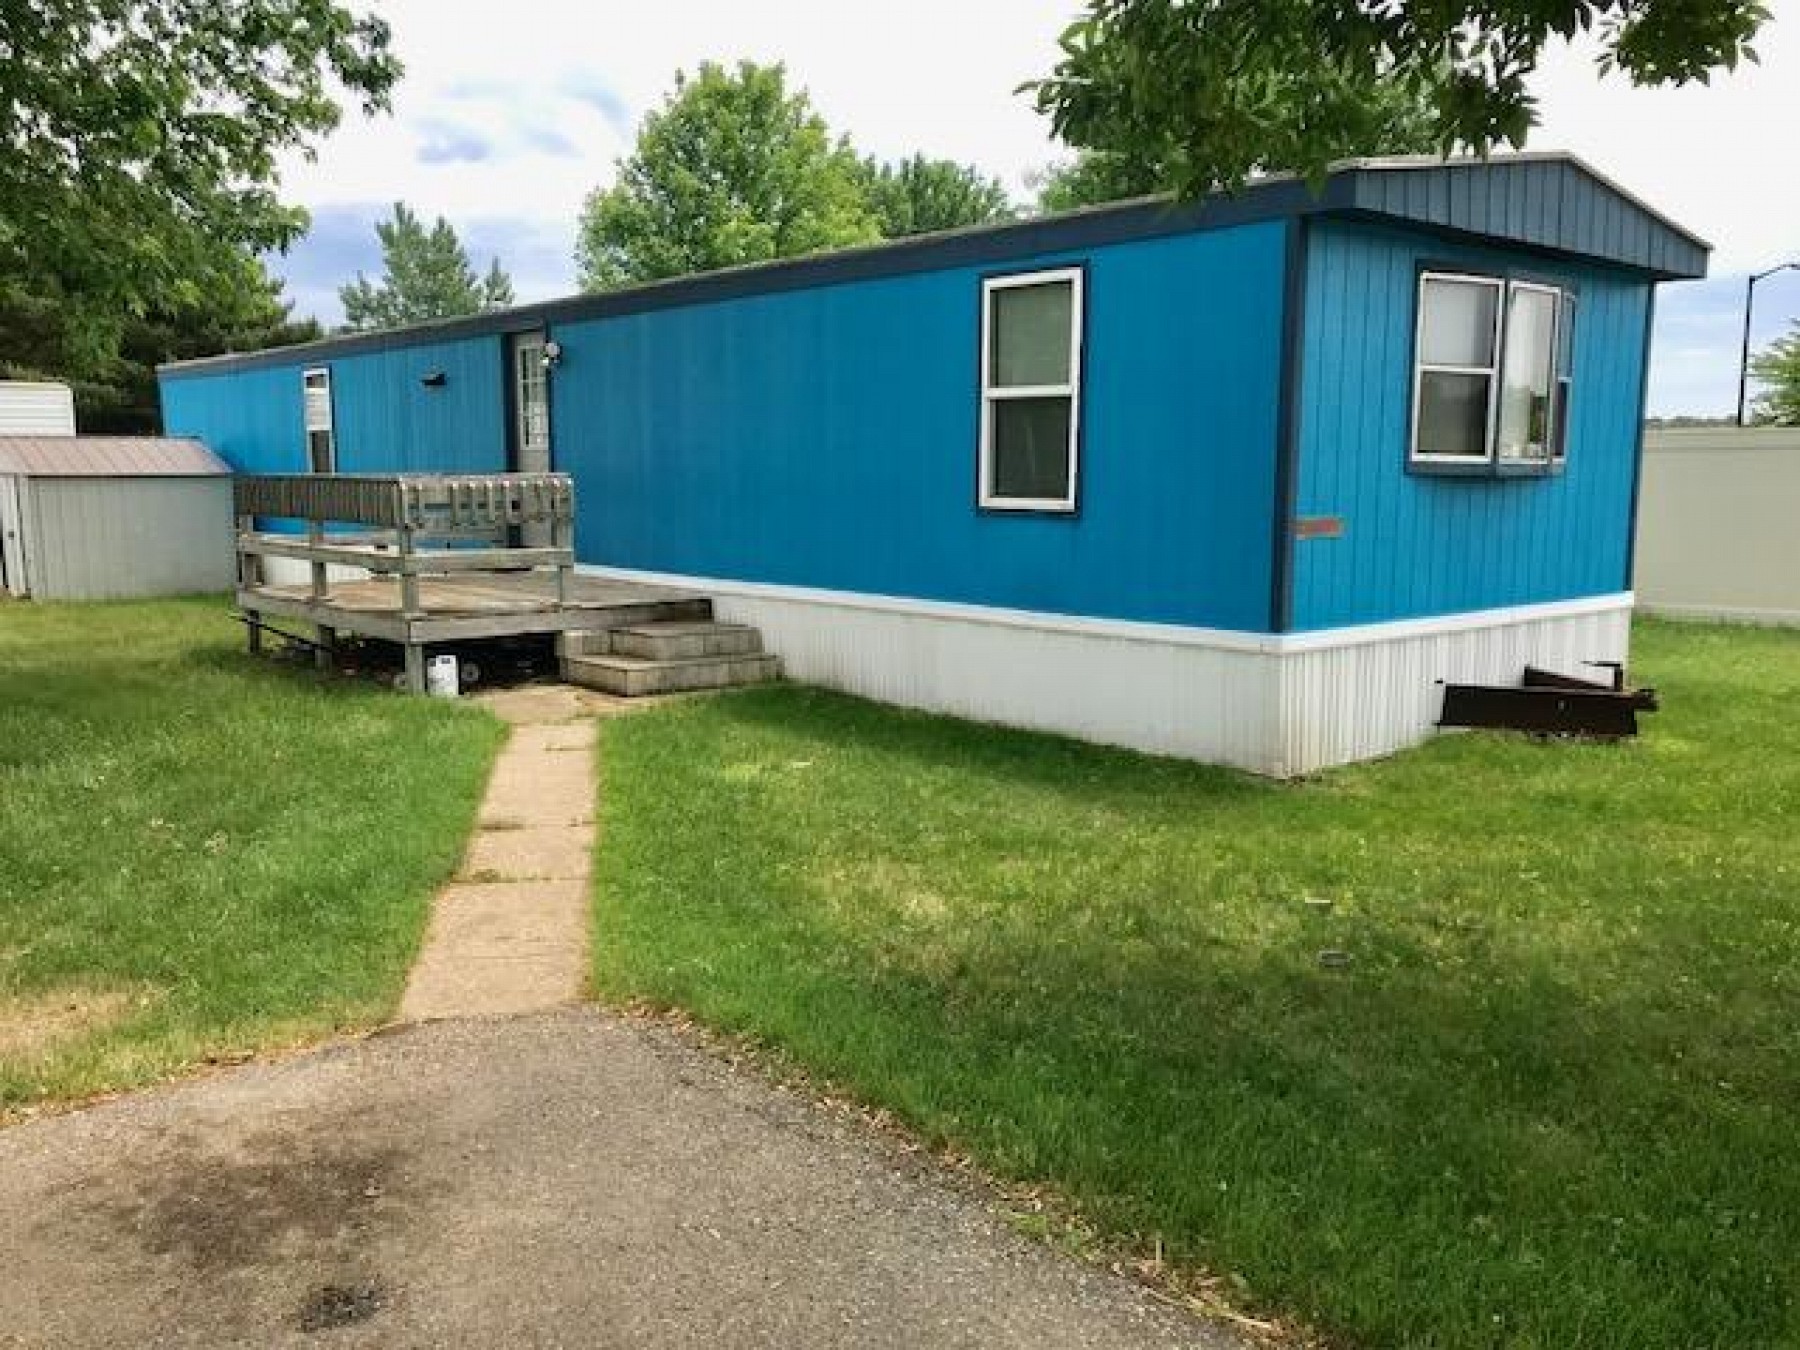 408 3rd Ave S, Brookings, SD 57006